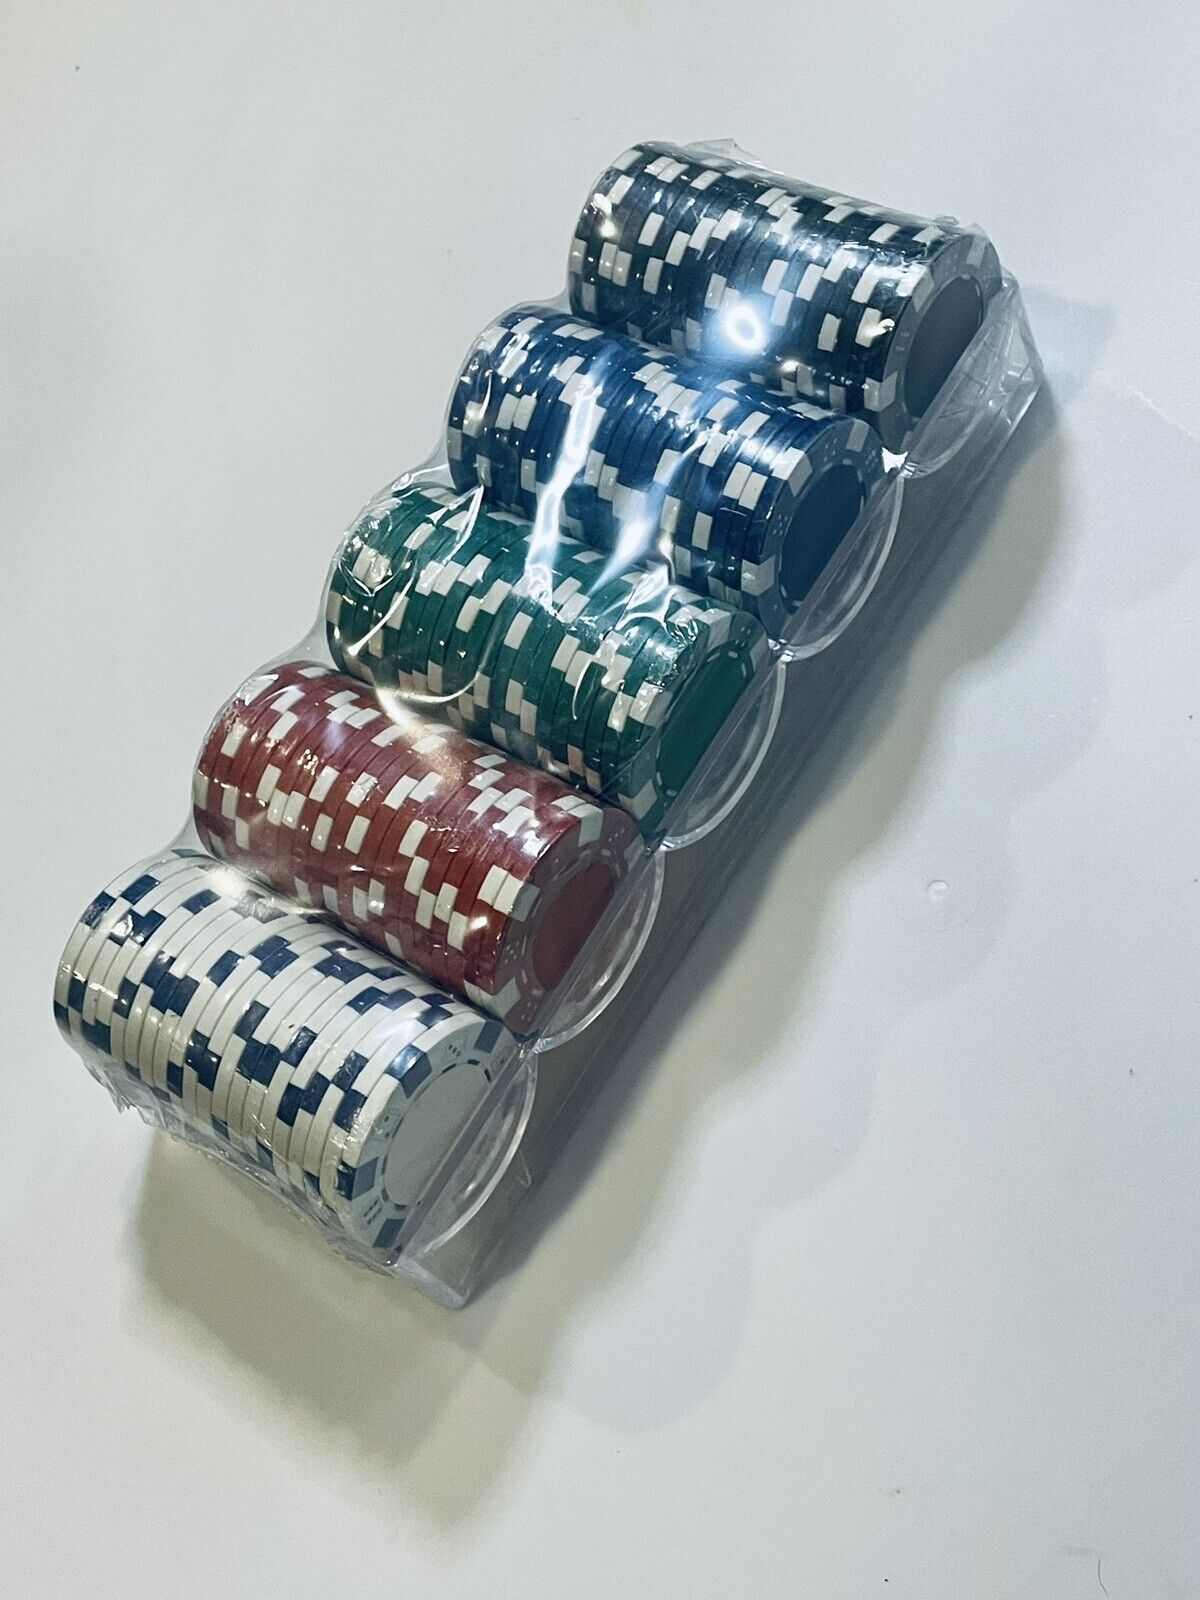 100 Pieces Poker Chips Set, 11.5G Clay Dice Striped Chip, 5 Colors Acrylic Case